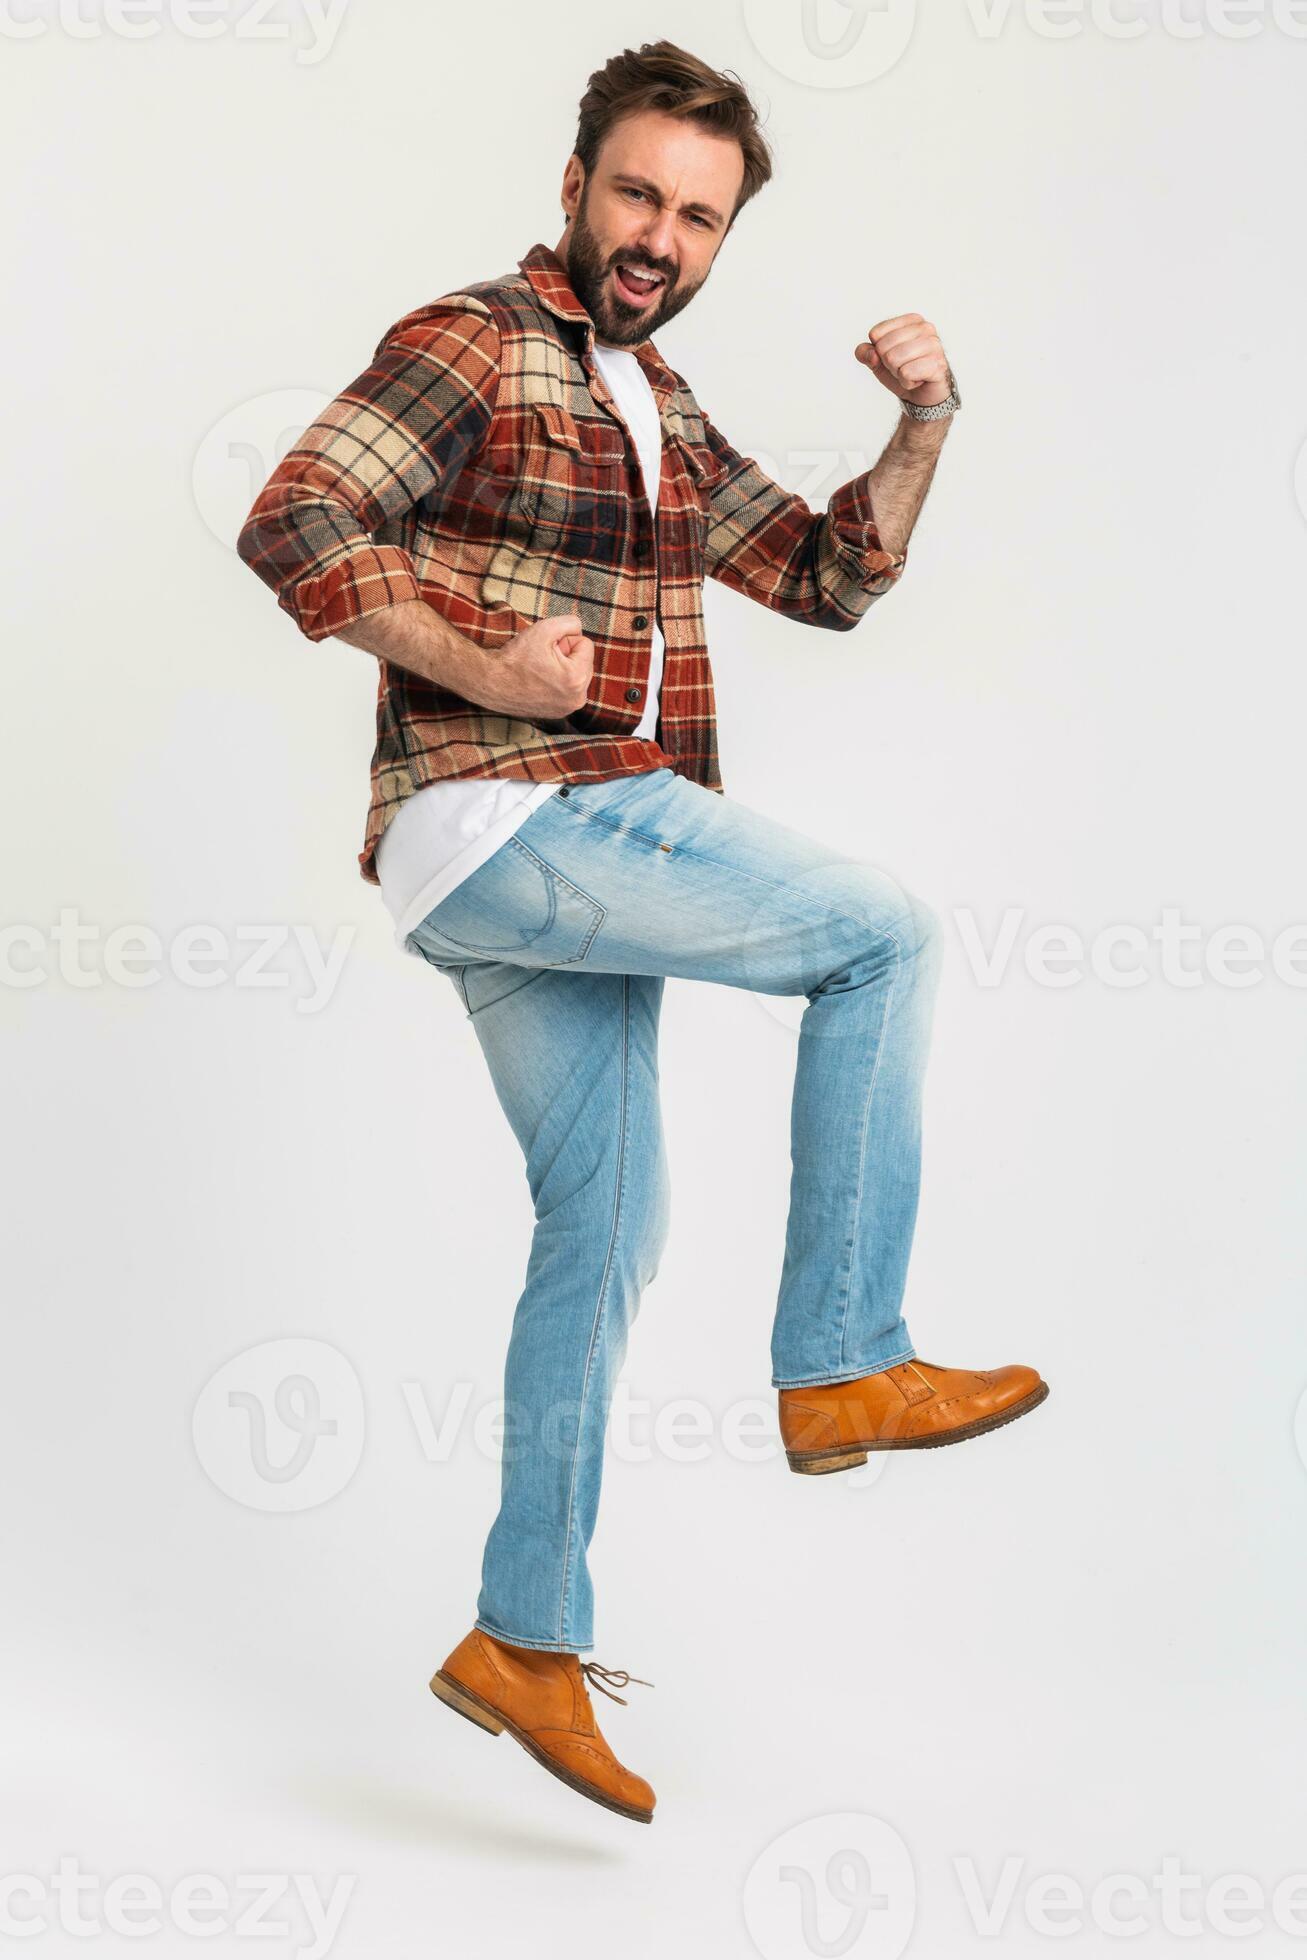 handsome bearded man in hipster outfit dressed in jeans and